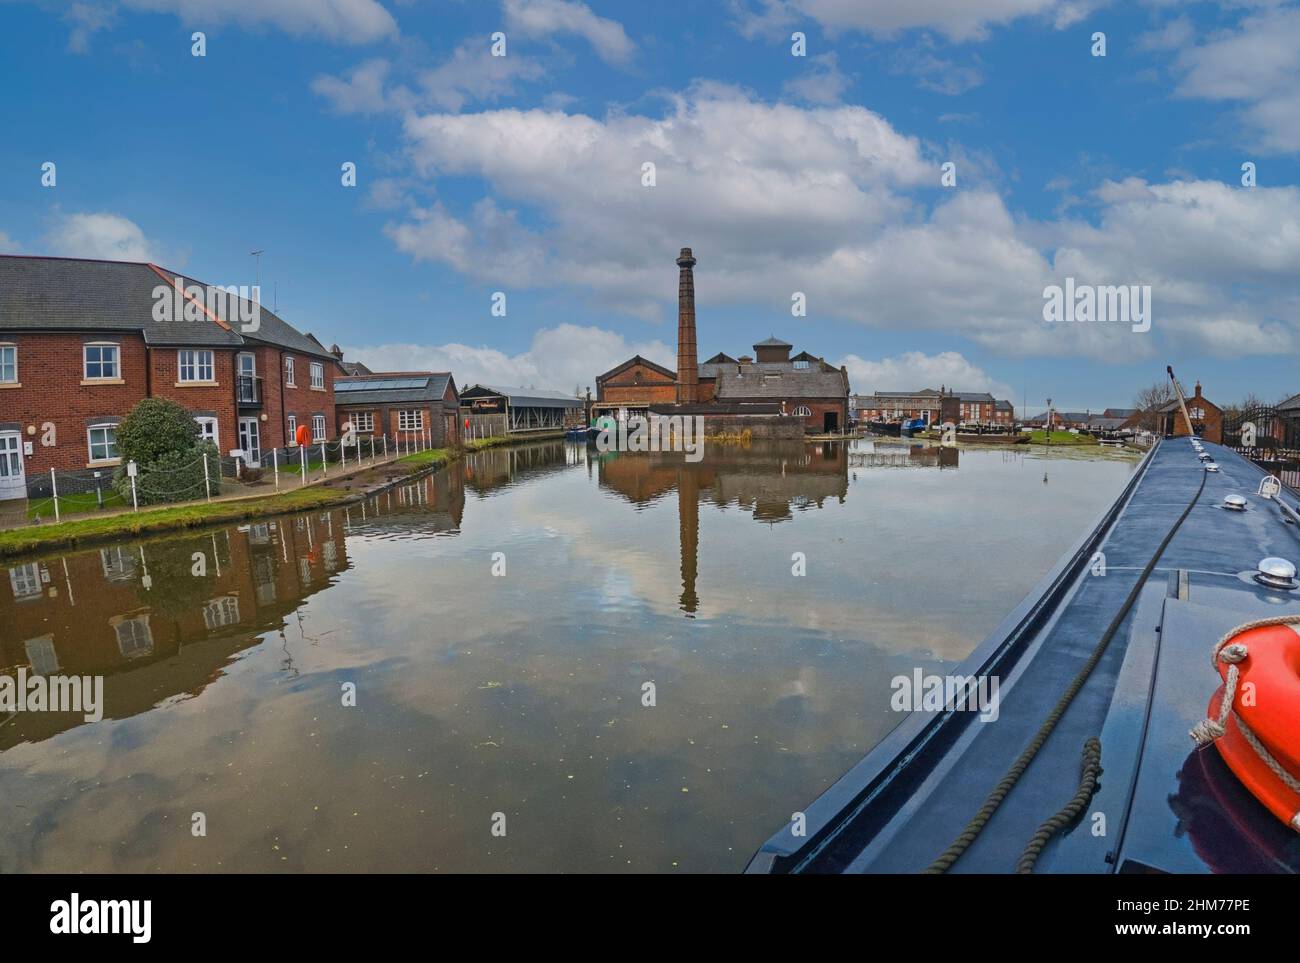 View from narrowboat traveling through English urban scenery on British canal with luxury waterfront real estate property in marina basin Stock Photo